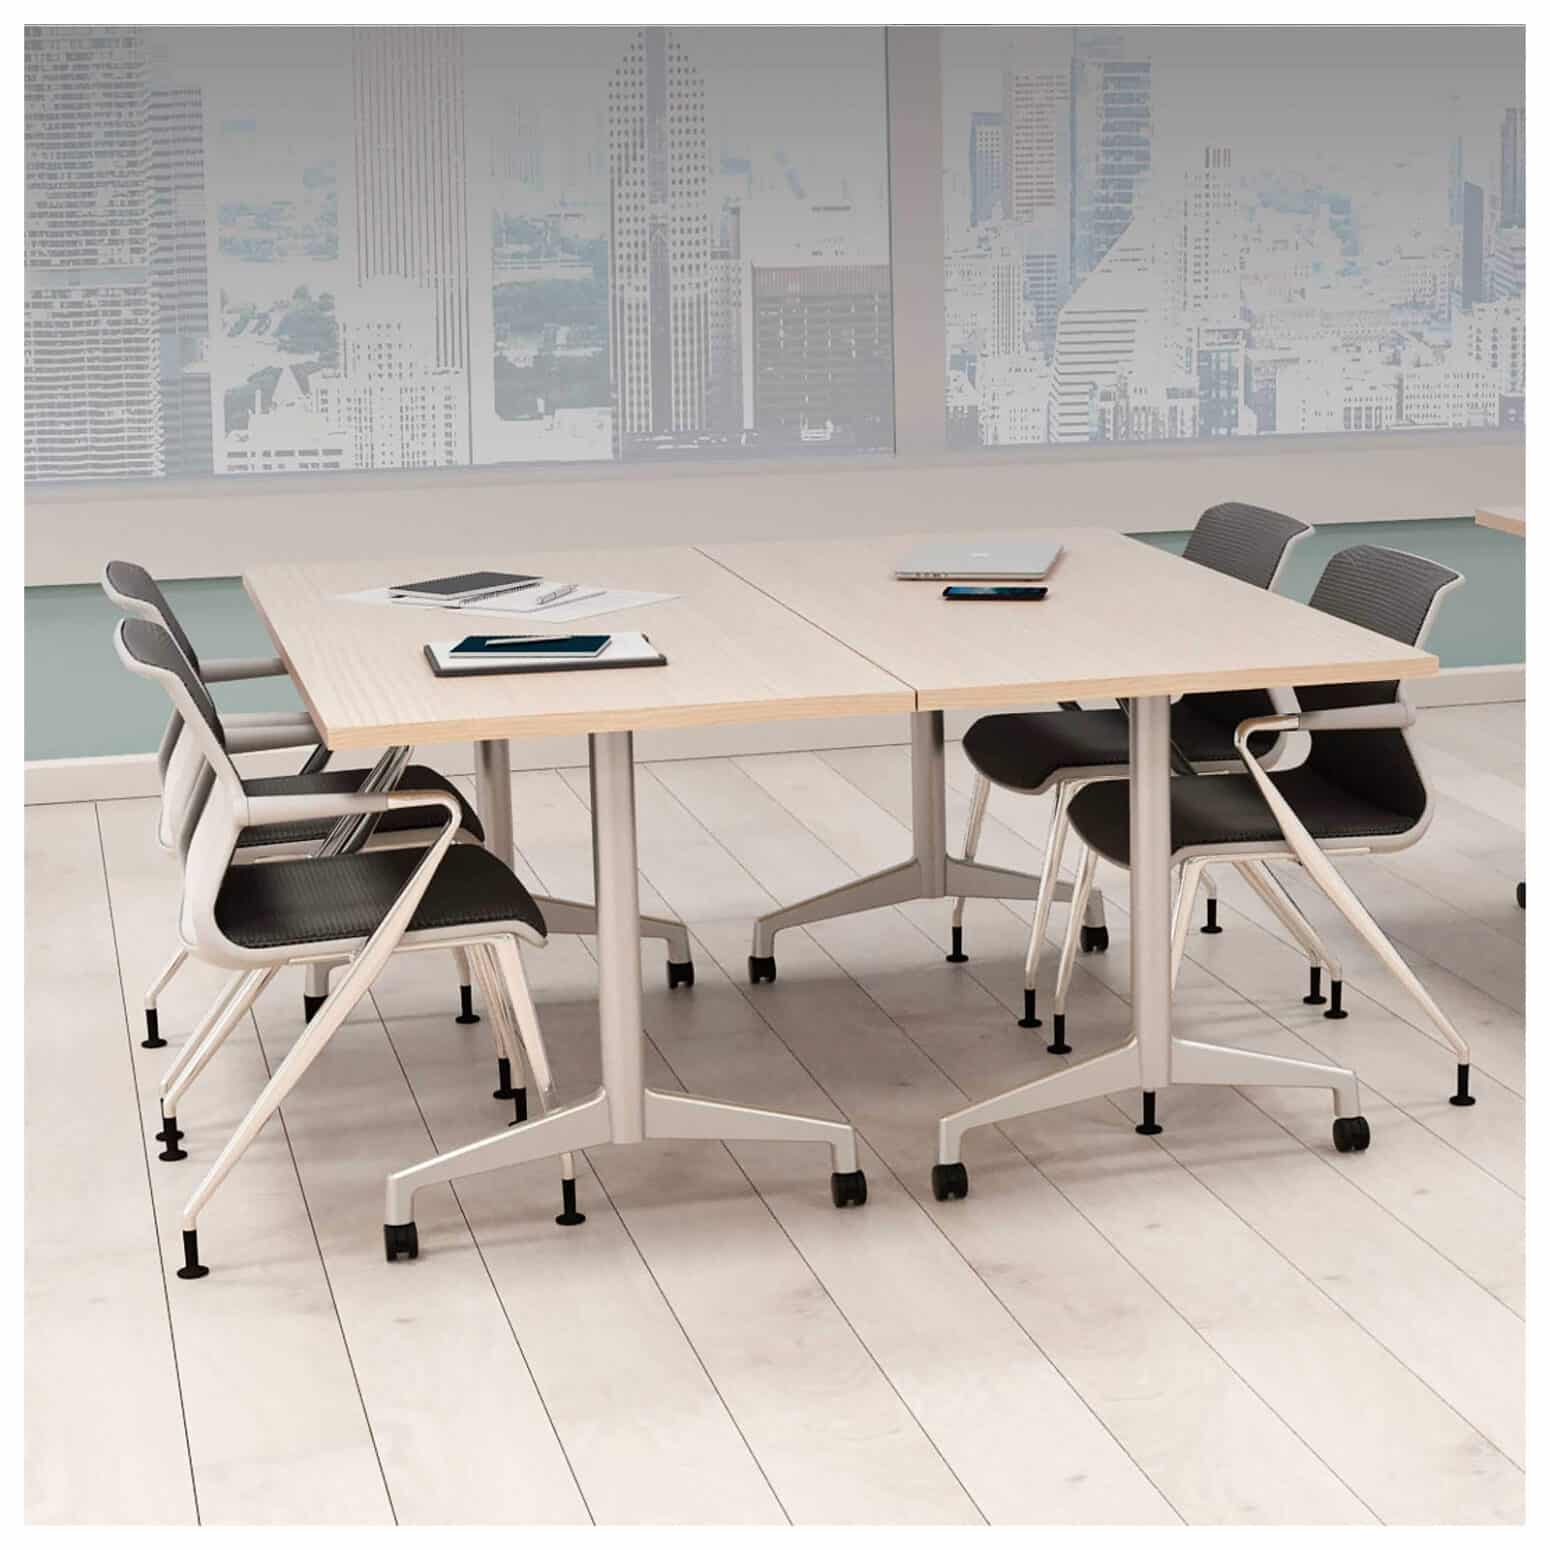 Deskmakers' Series Training Tables